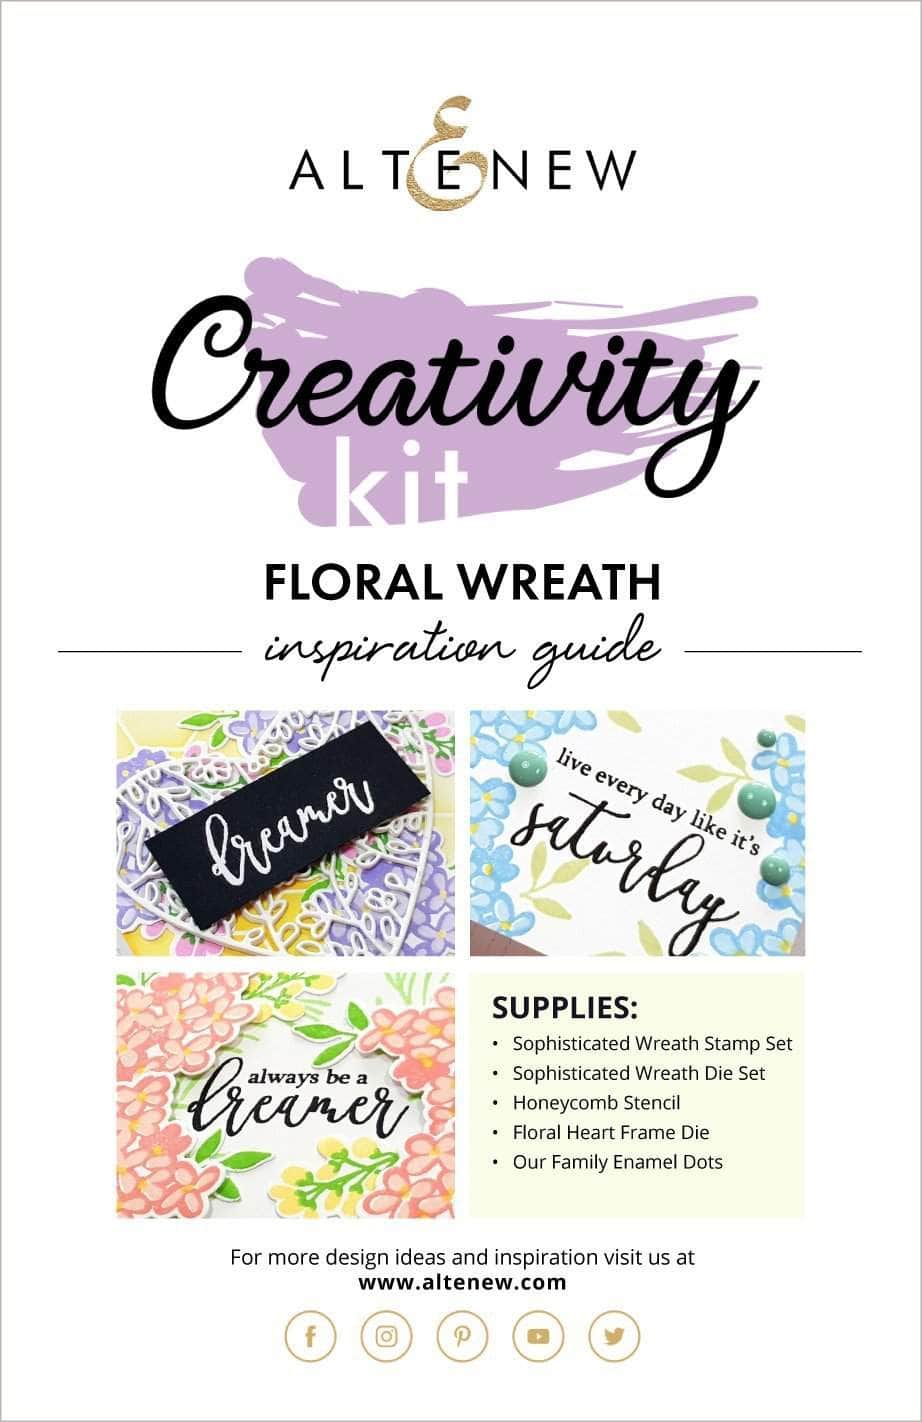 Printed Media Floral Wreaths Creativity Kit Inspiration Guide